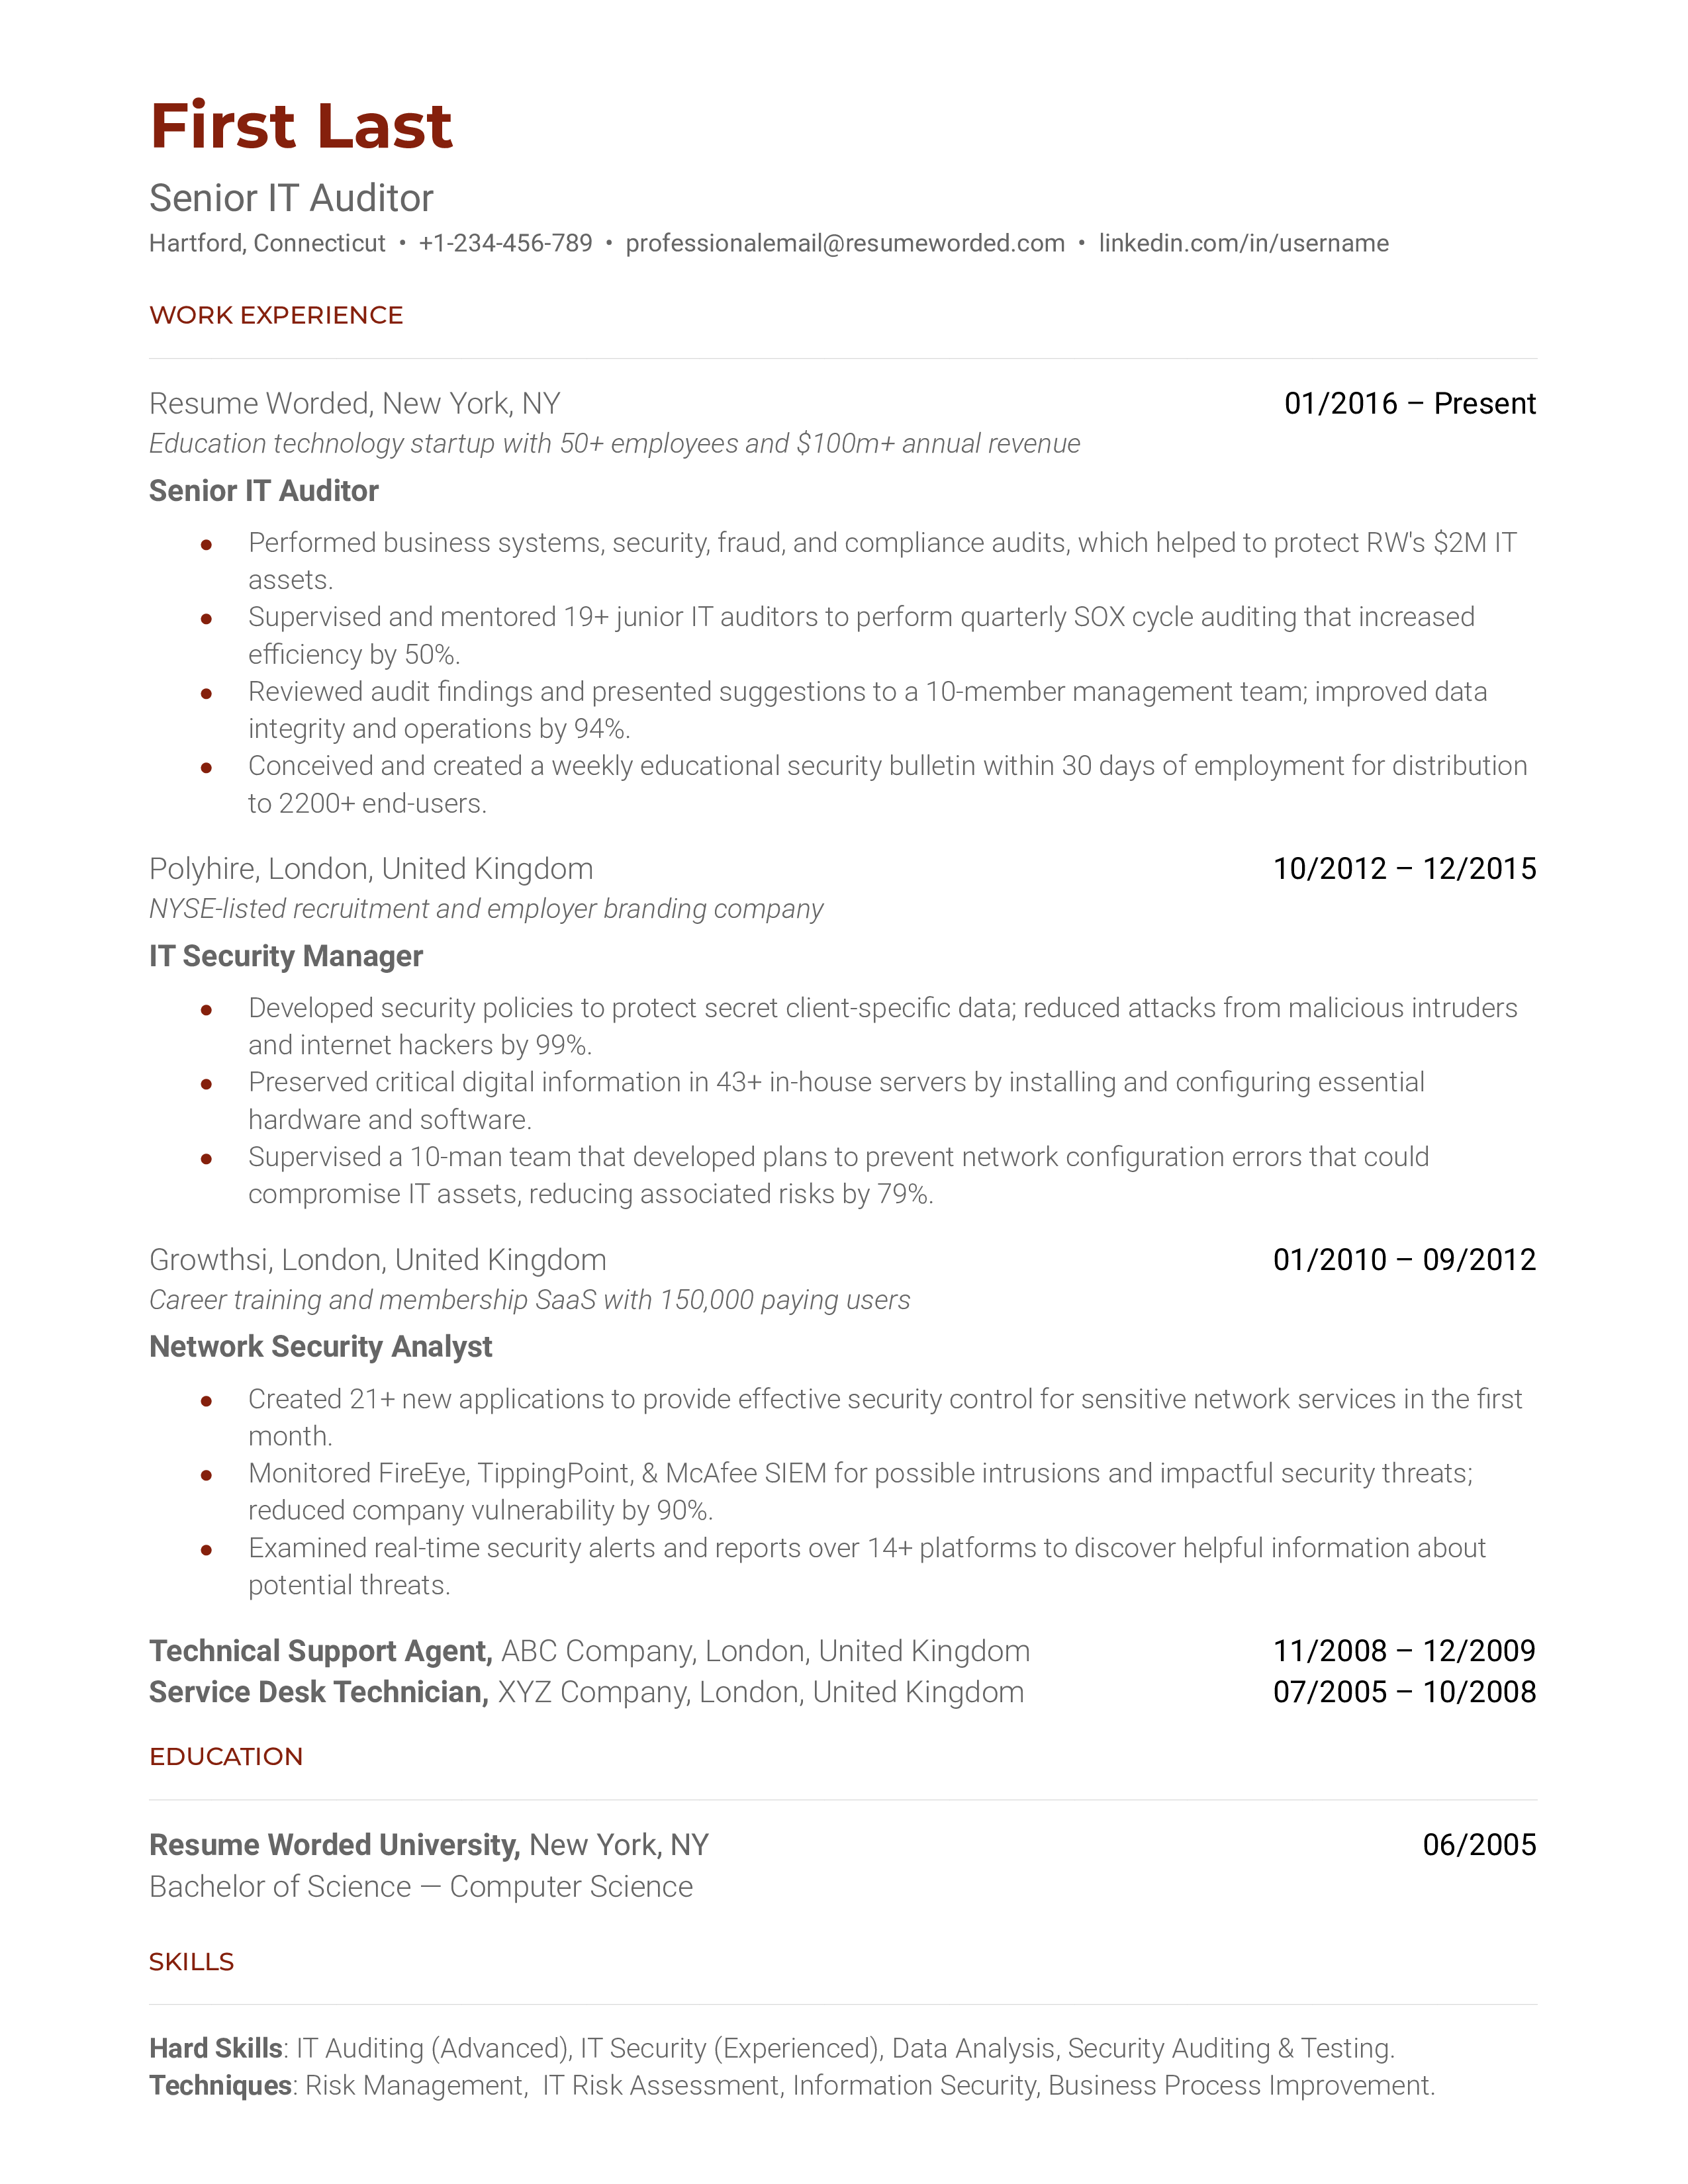 A senior IT auditor resume template that prioritizes relevant work experience.